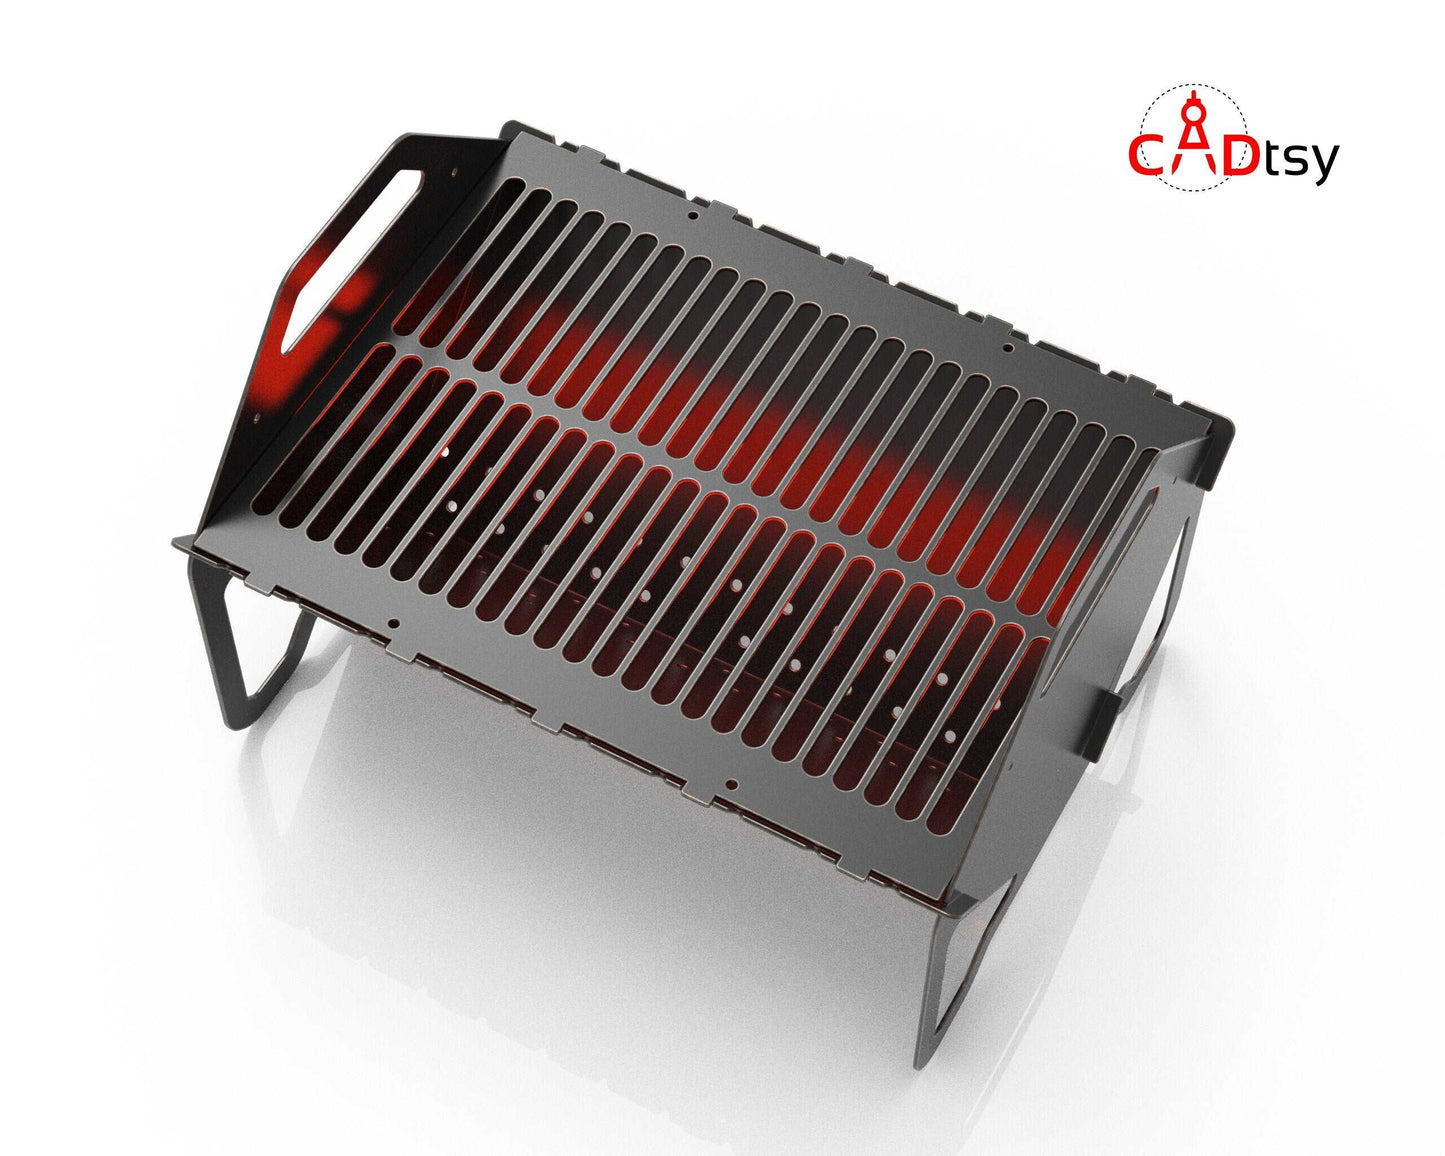 Collapsible Fire Pit Portable Camping Grill